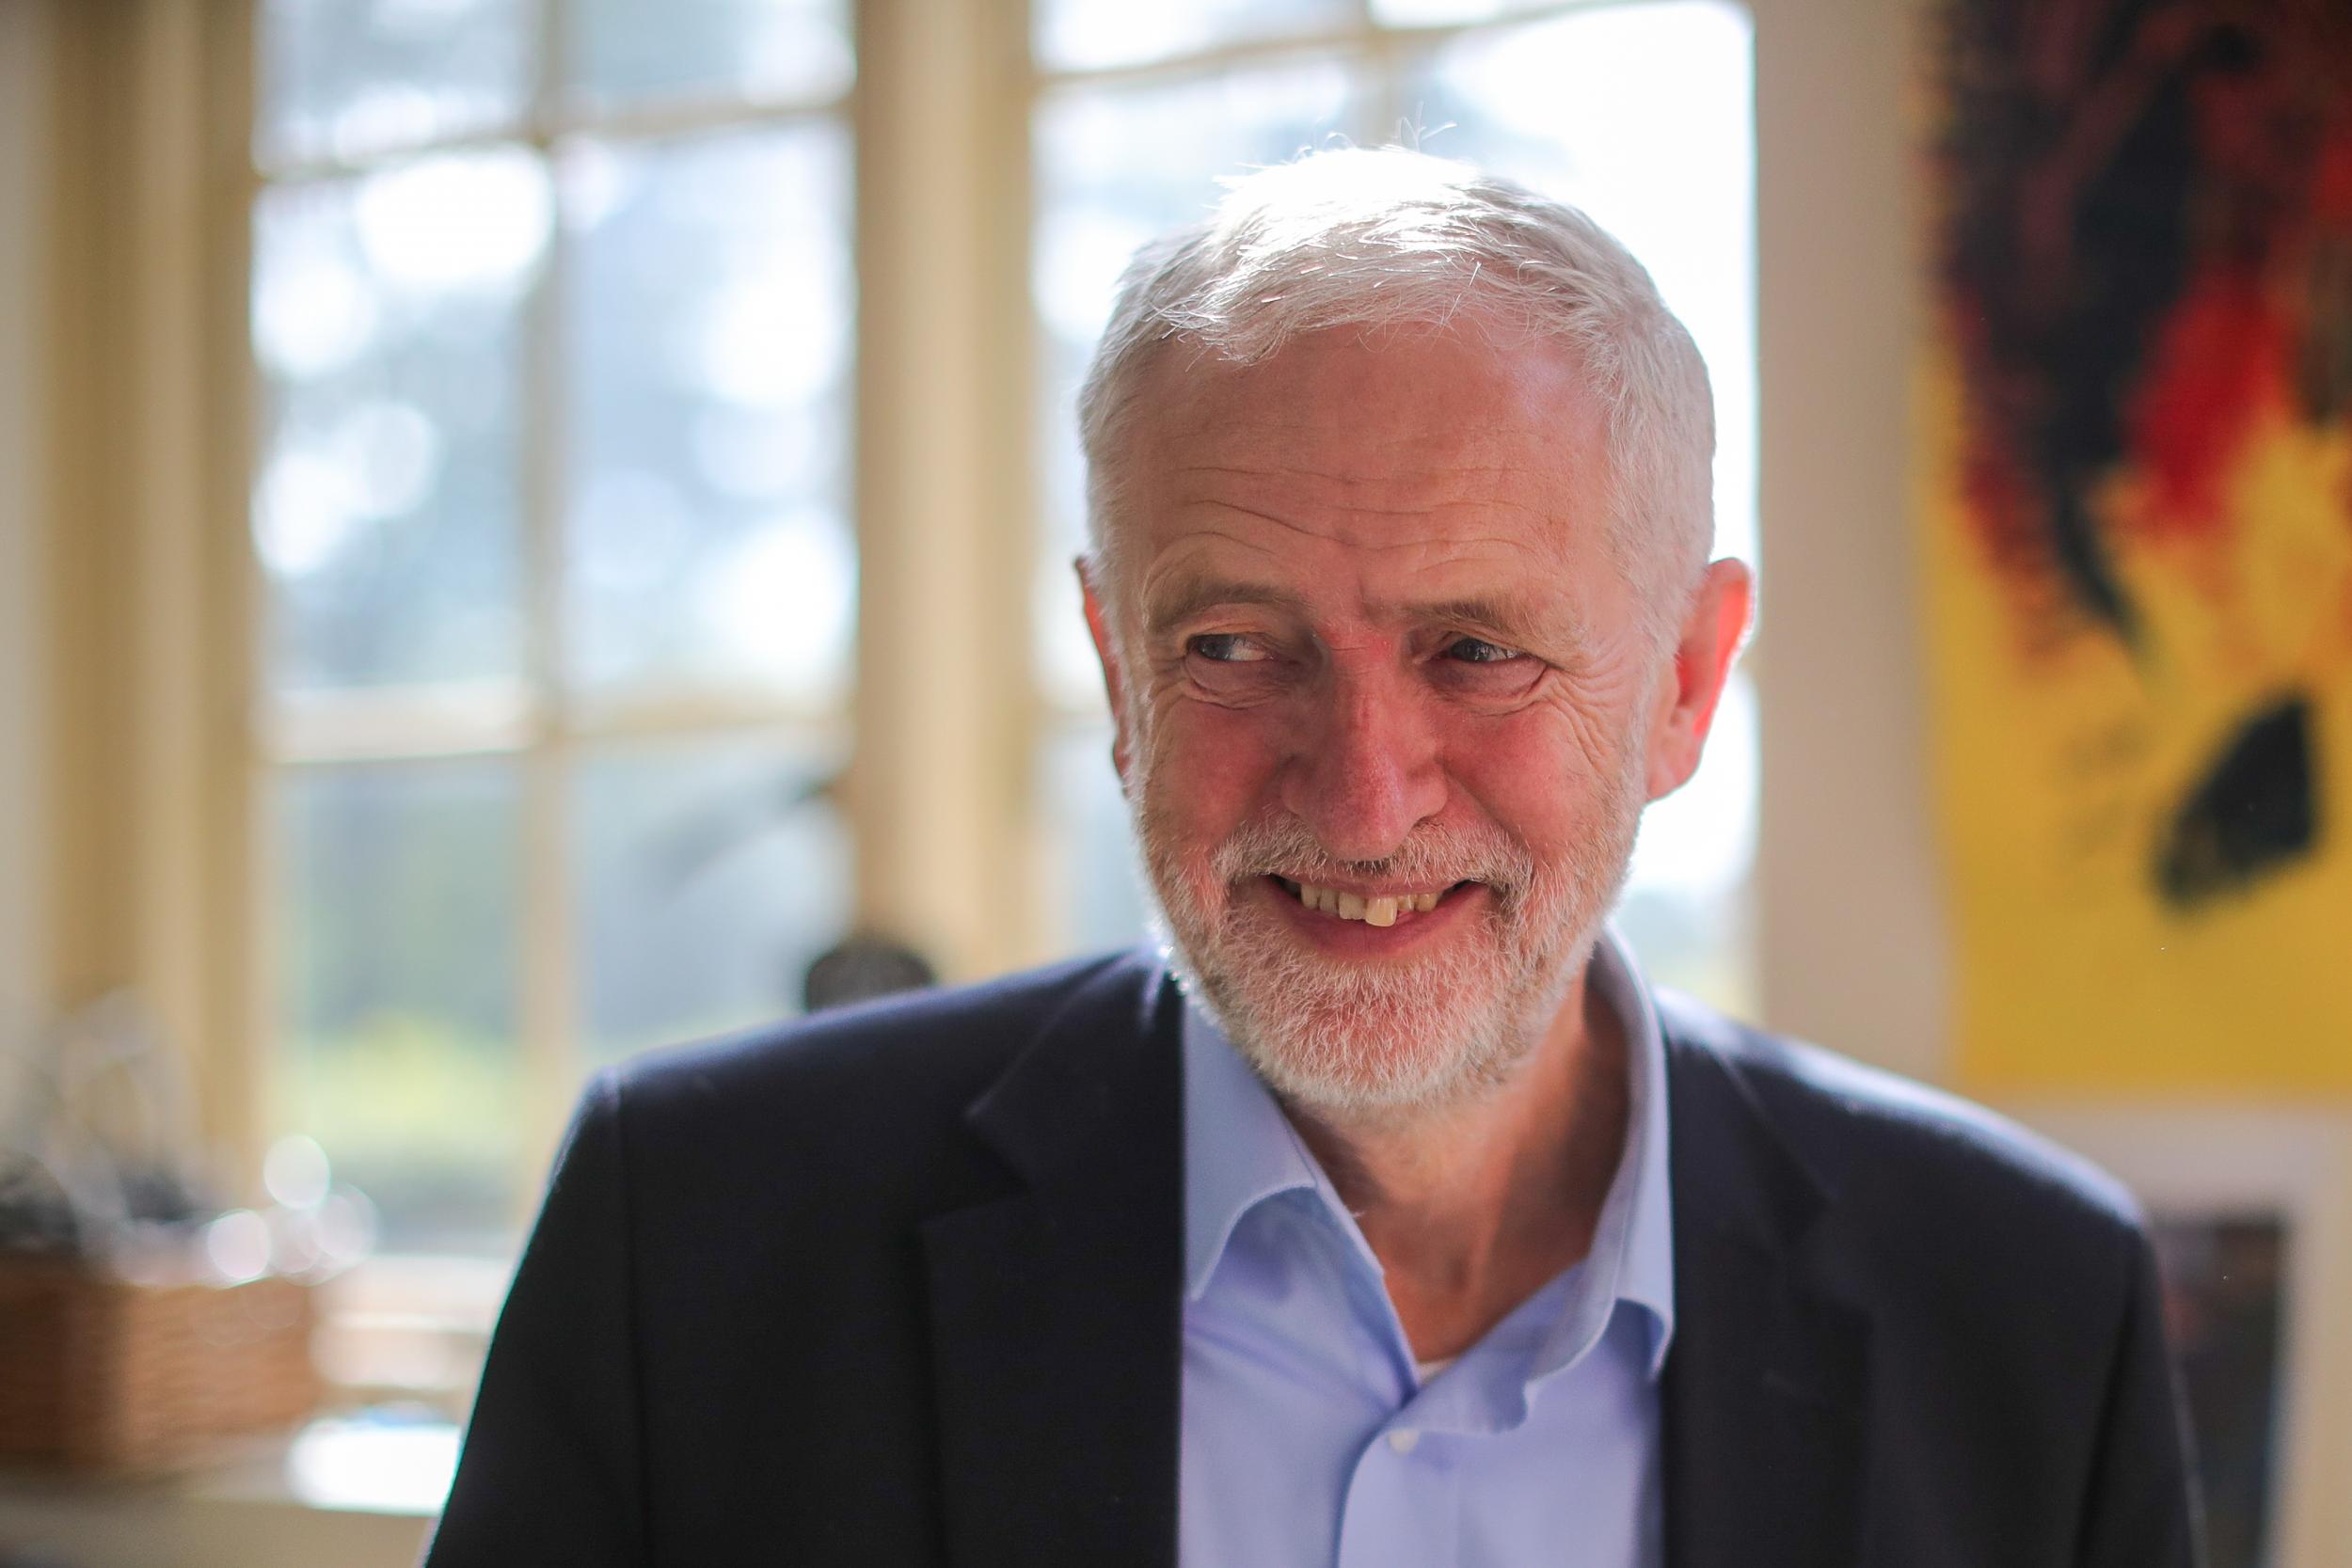 Jeremy Corbyn has more to do to prove Labour is ready to take power